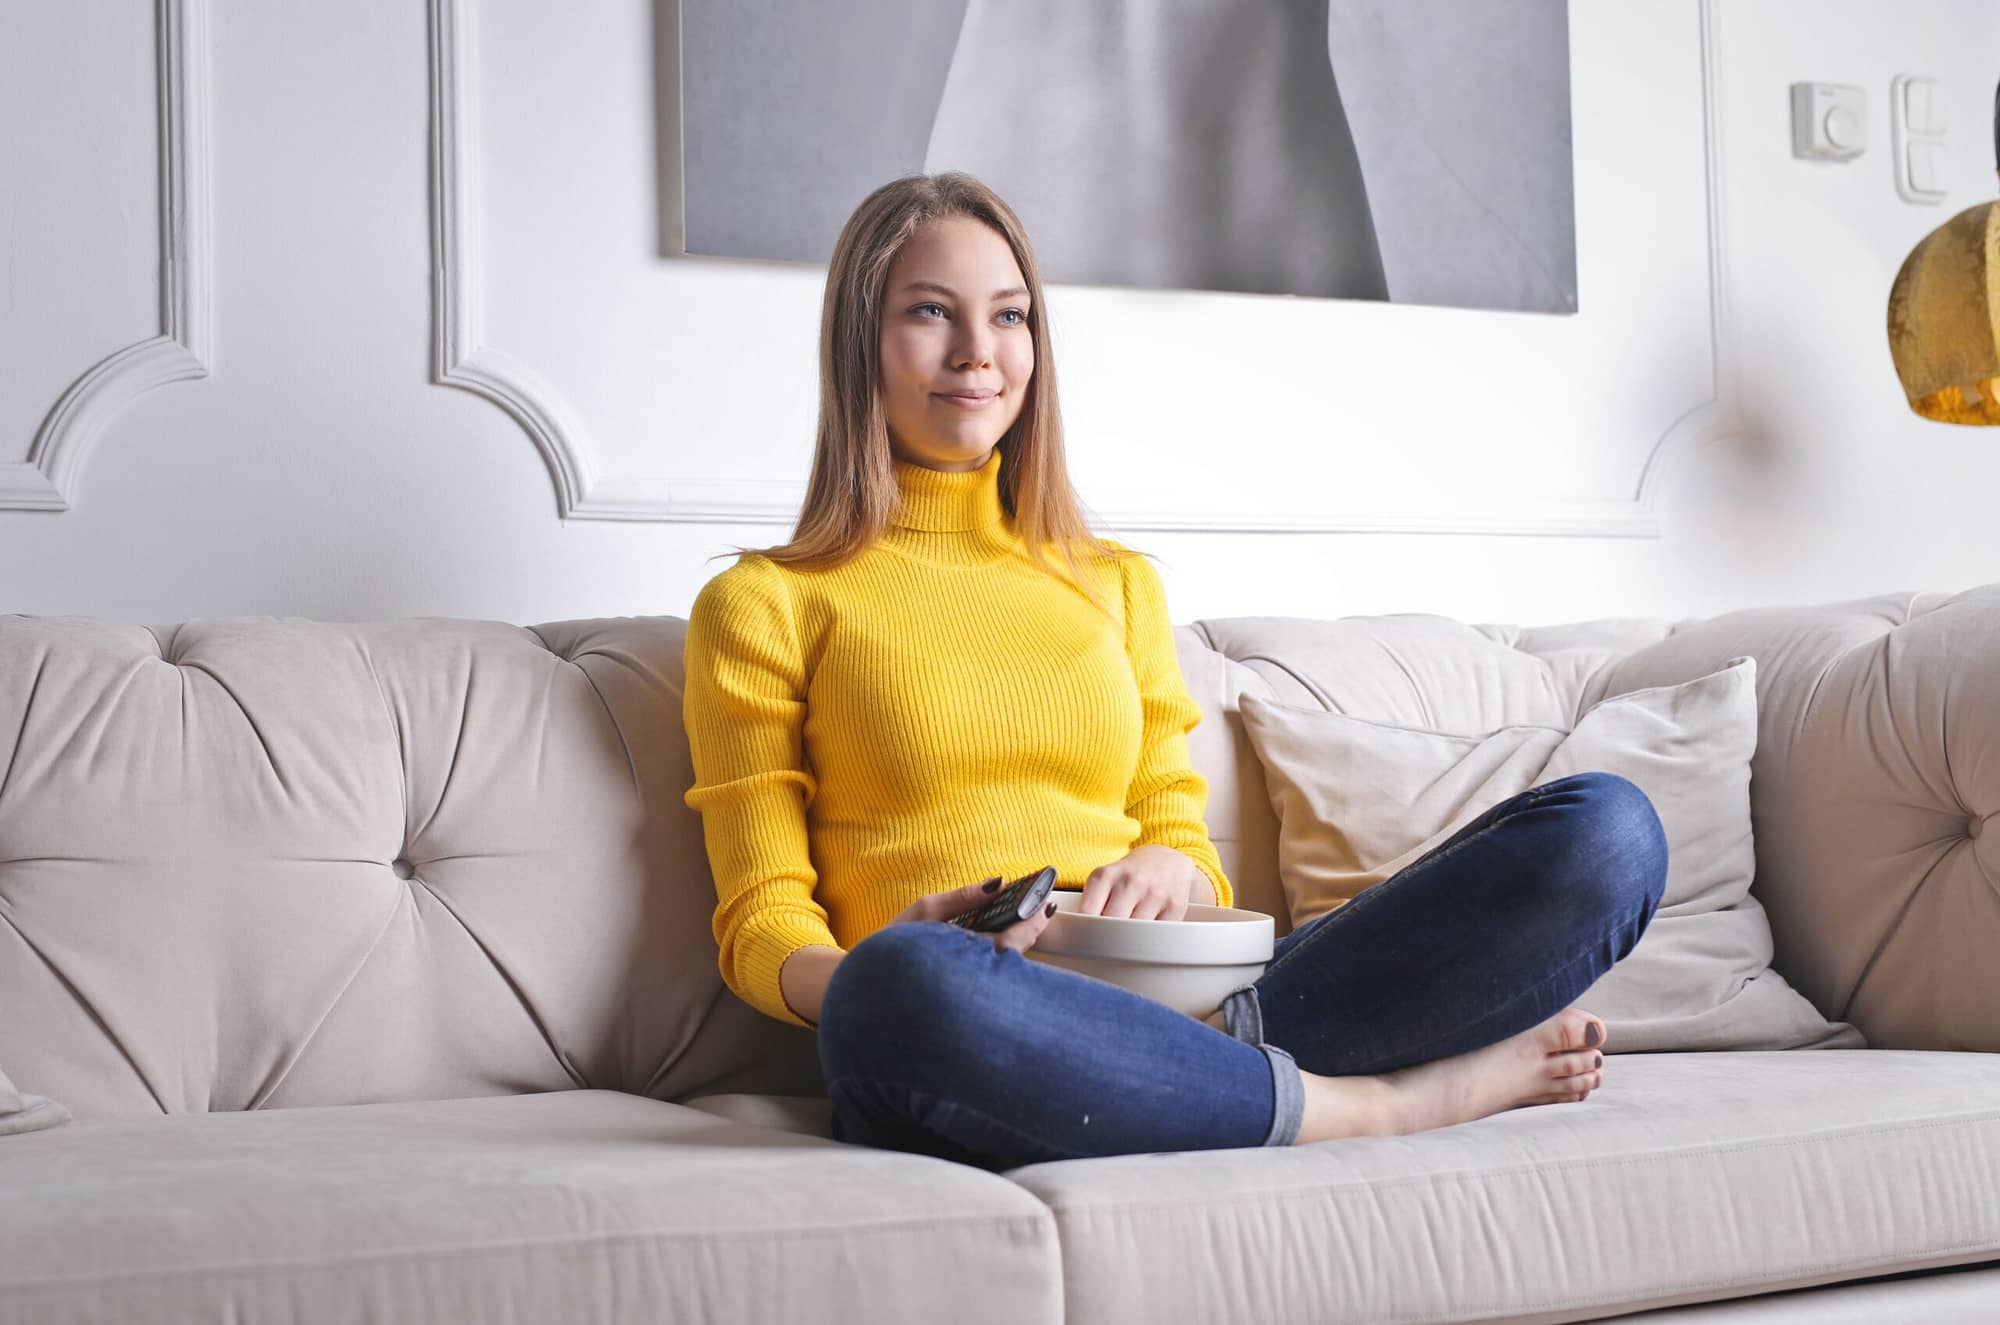 young woman in yellow jersy sitting on the sofa with popcorn on laps and remote in rand watching TV